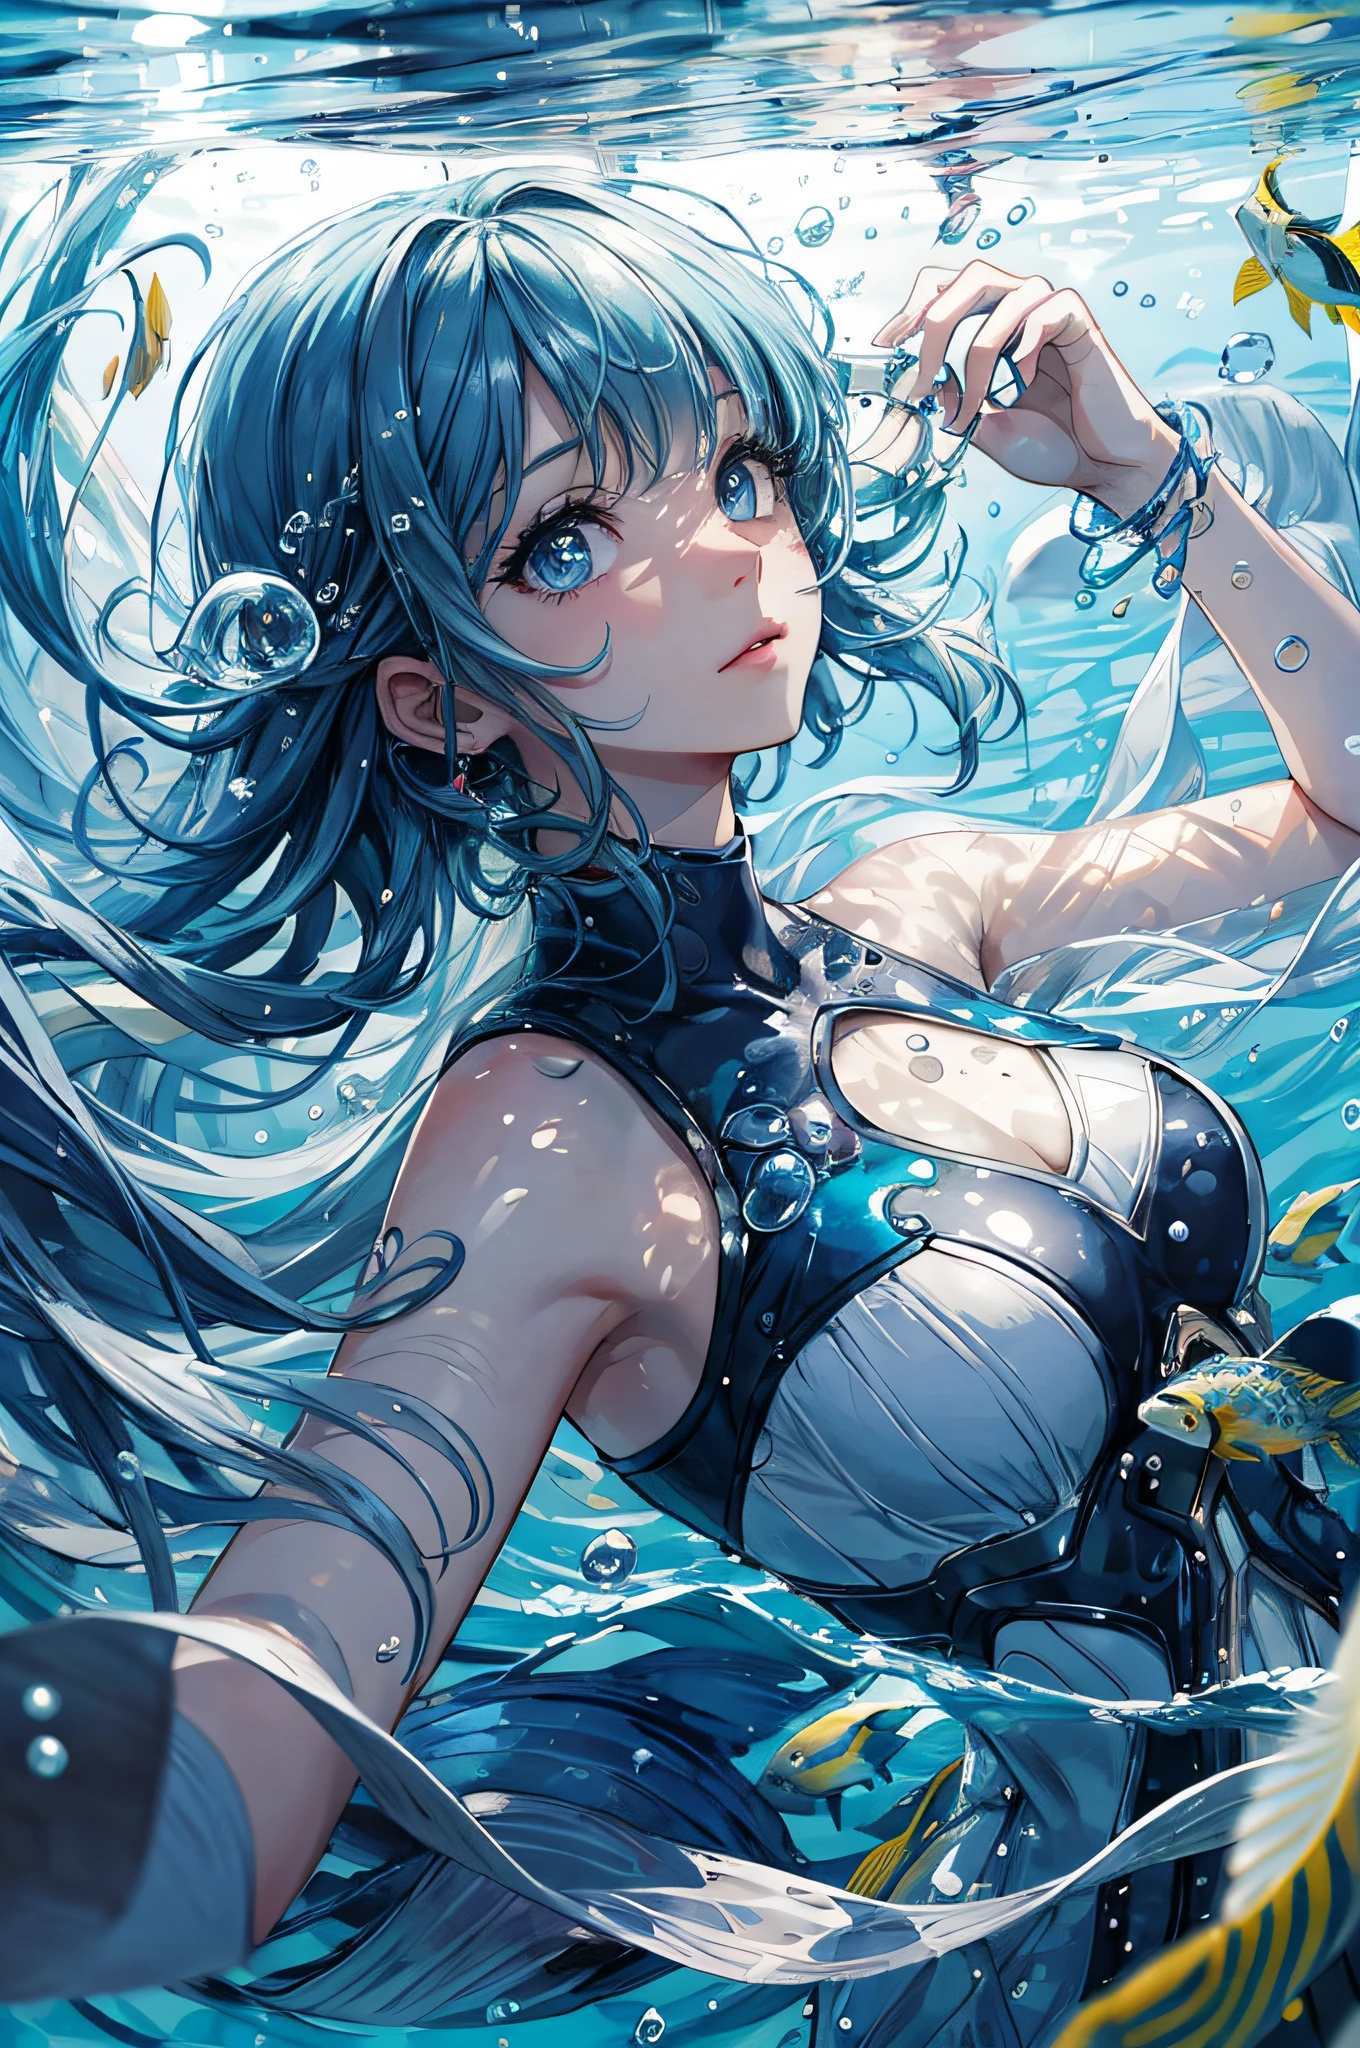 abstract background,(illustration:1),masterpiece,best quality,detailed face and eyes,1 girl,underwater hair physics,air bubbles,light coming through water,reflections,laying in water,split layers of water,school of fish,beauty,